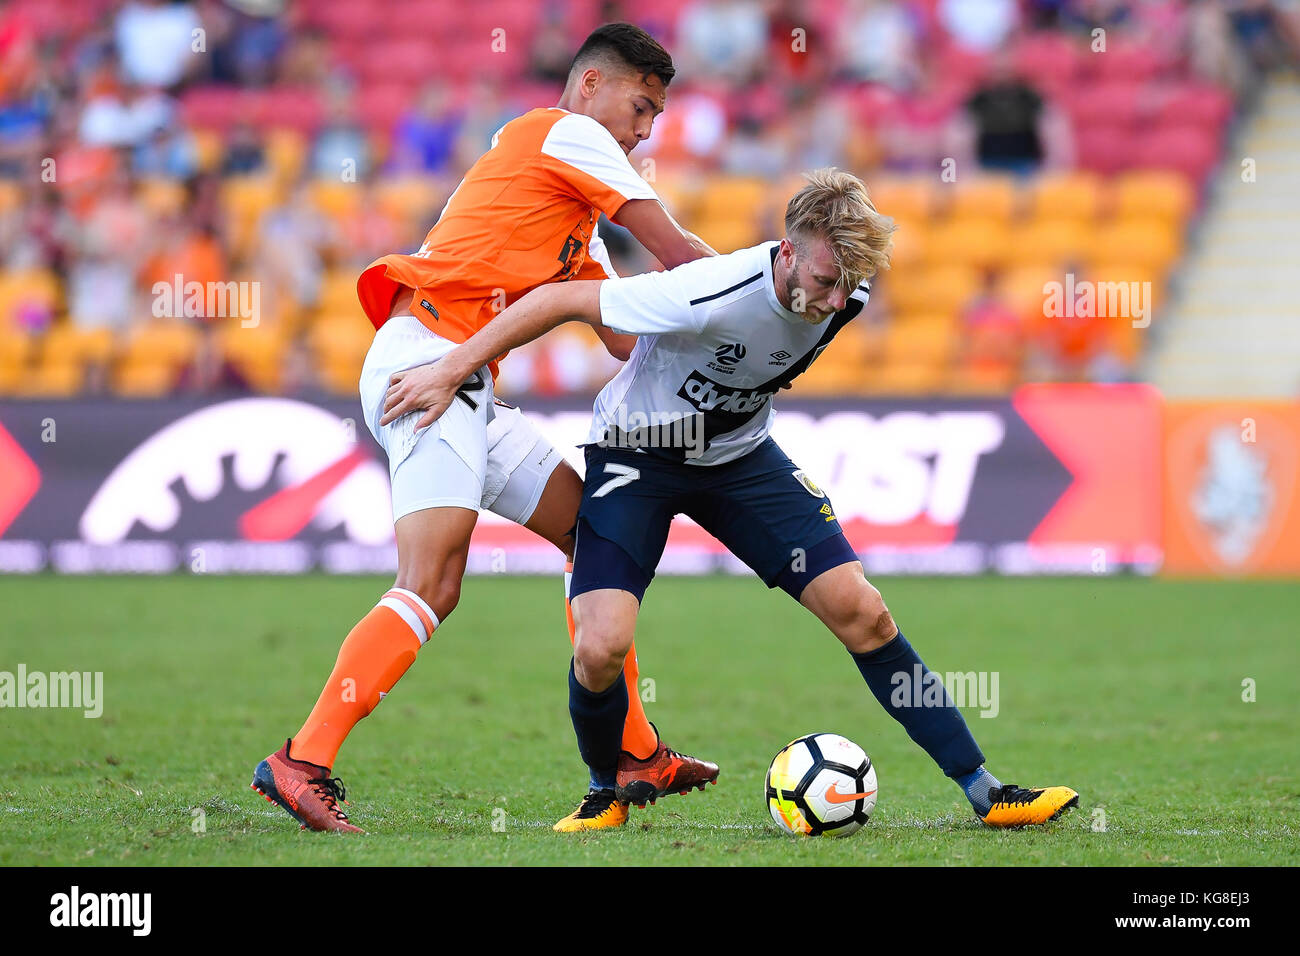 Brisbane, QUEENSLAND, AUSTRALIA. 5th Nov, 2017. Andrew Hoole of the Mariners (#7, right) and Dane Ingham of the Roar (#2) compete for the ball during the round five Hyundai A-League match between the Brisbane Roar and the Central Coast Mariners at Suncorp Stadium on November 5, 2017 in Brisbane, Australia. Credit: Albert Perez/ZUMA Wire/Alamy Live News Stock Photo